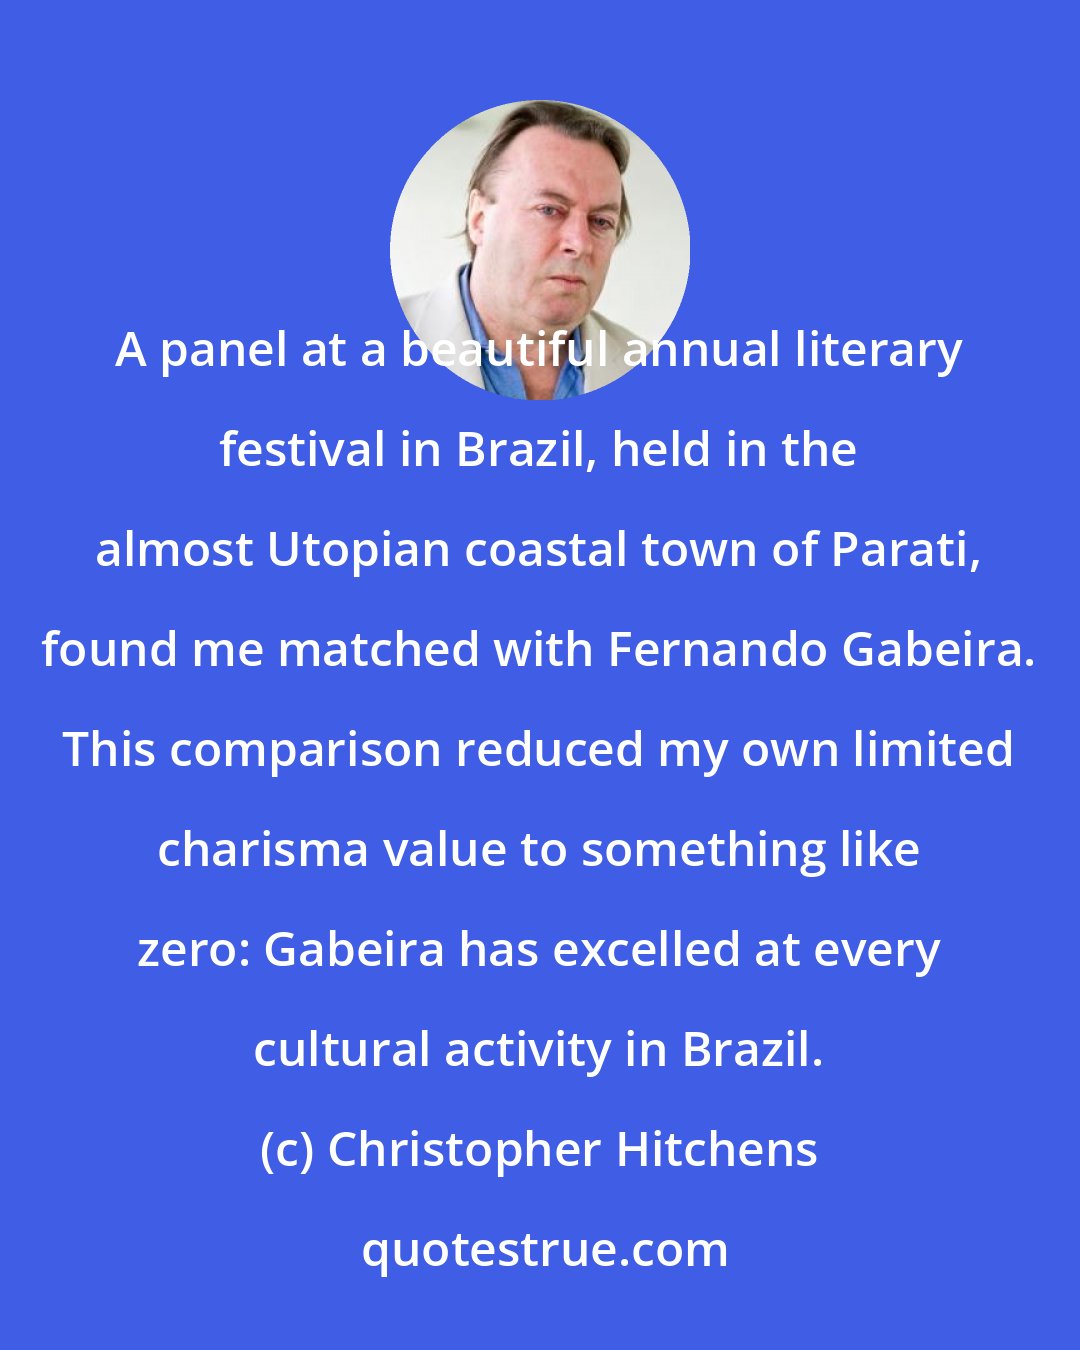 Christopher Hitchens: A panel at a beautiful annual literary festival in Brazil, held in the almost Utopian coastal town of Parati, found me matched with Fernando Gabeira. This comparison reduced my own limited charisma value to something like zero: Gabeira has excelled at every cultural activity in Brazil.